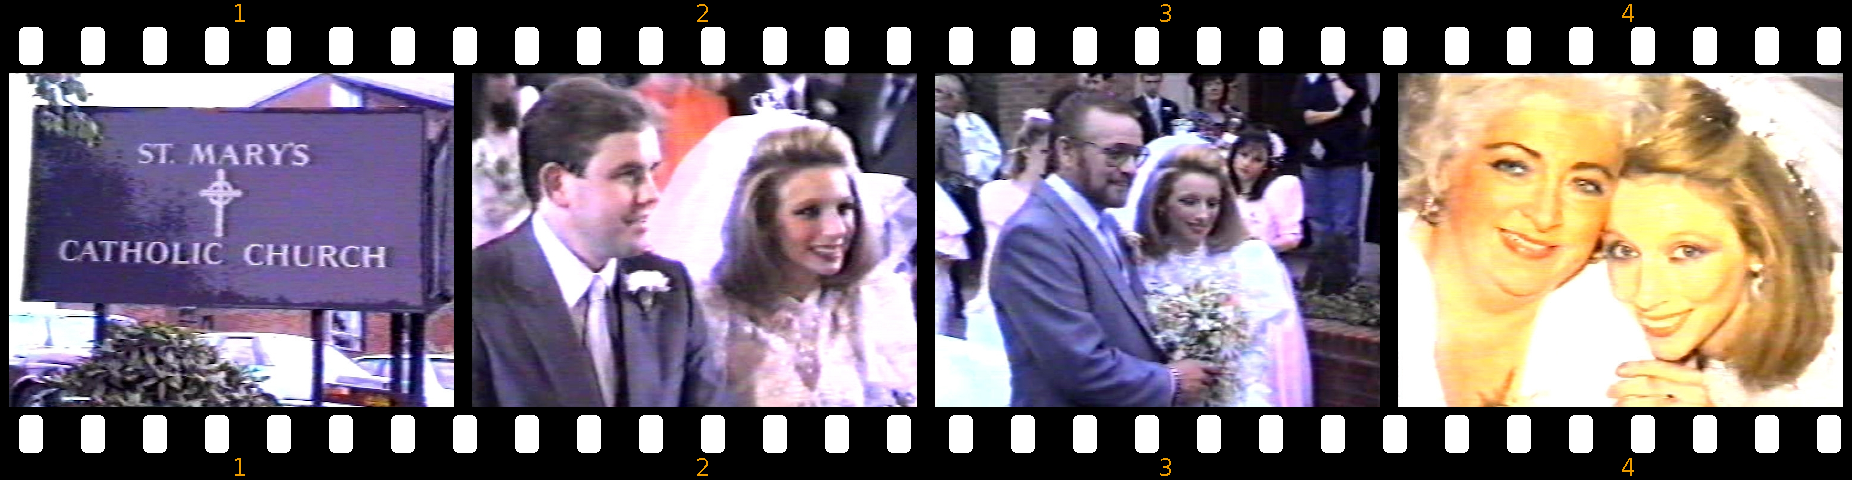 Made up filmstrip of images from the wedding of Lena Zavaroni And Peter Wiltshire.